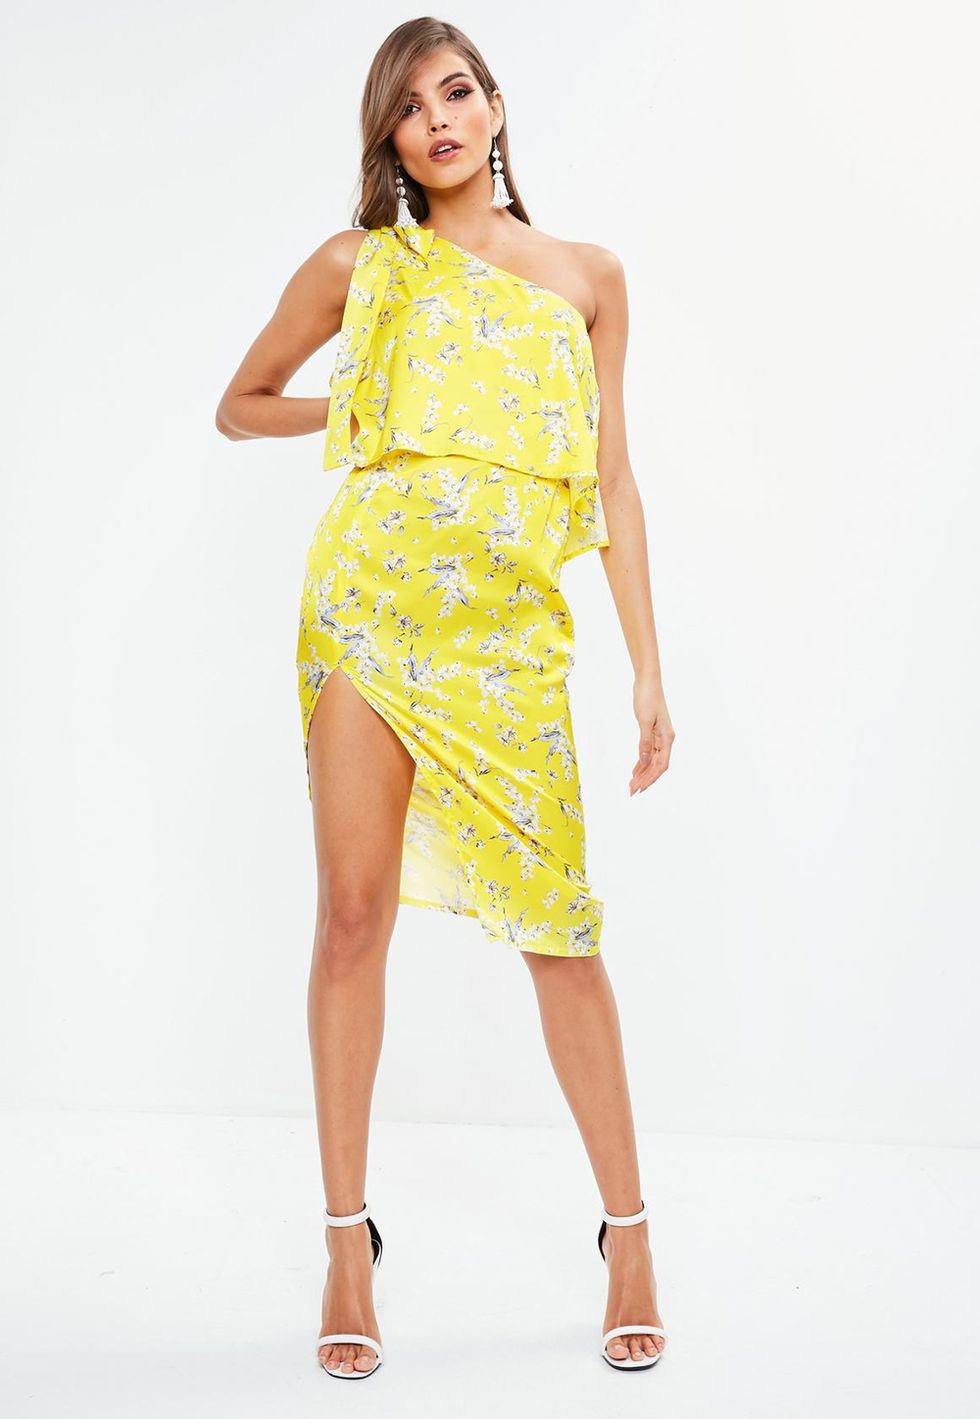 Fashion model, Clothing, Dress, Cocktail dress, Day dress, Shoulder, Yellow, Joint, Waist, One-piece garment, 